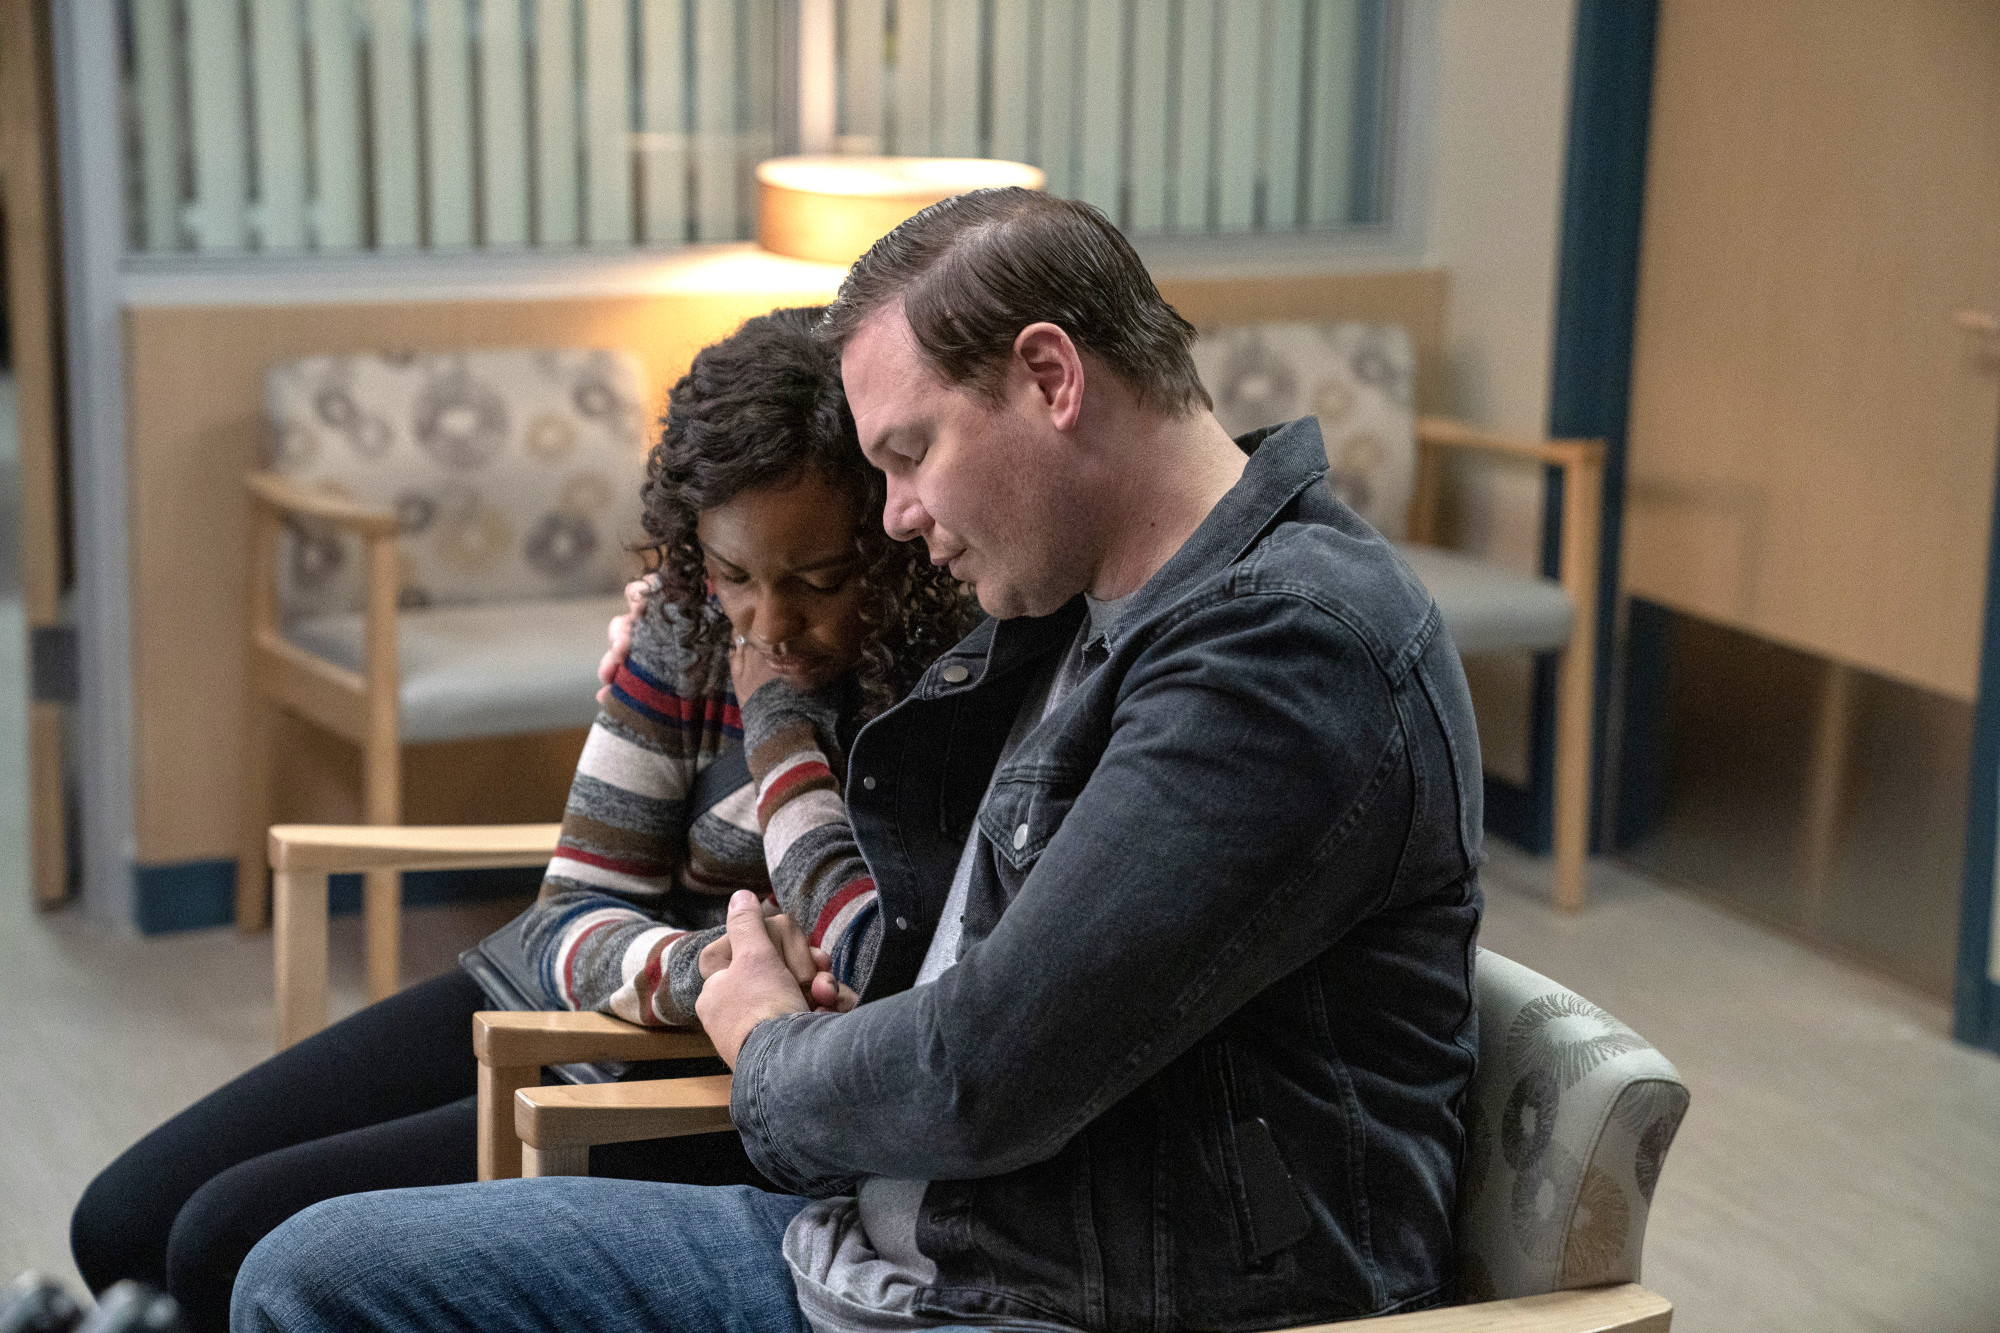 9-1-1: LONE STAR: L-R: Sierra McClain and Jim Parrack in the “Monster Inside” episode of 9-1-1: LONE STAR airing Monday, March 2 (8:00-9:01 PM ET/PT) on FOX. ©2020 Fox Media LLC. CR: Jack Zeman/FOX.